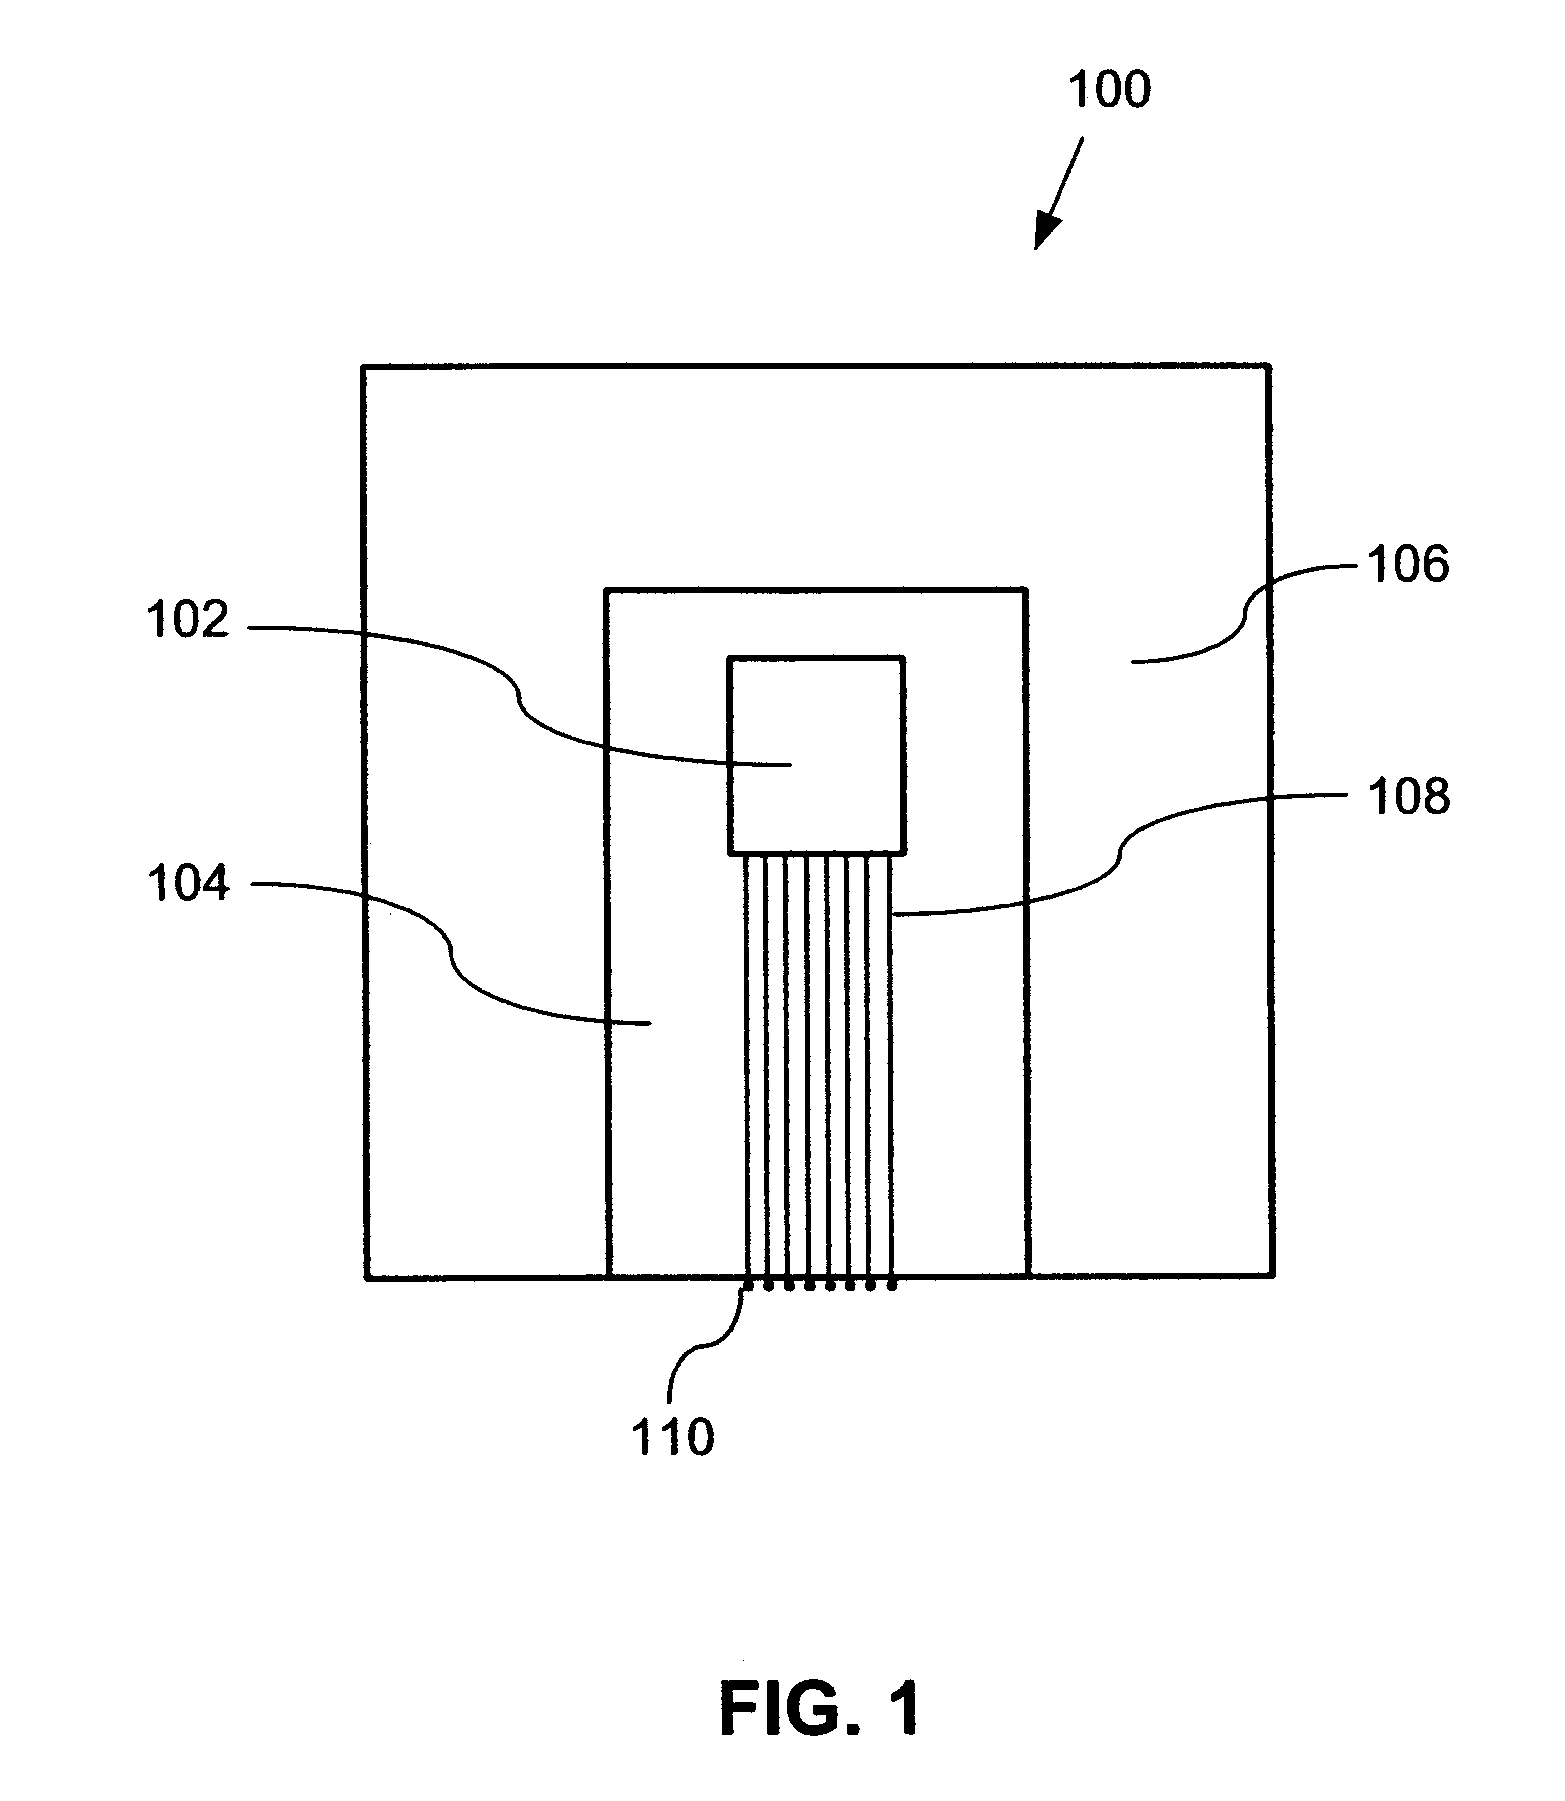 Semiconductor Module with Serial Bus Connection to Multiple Dies